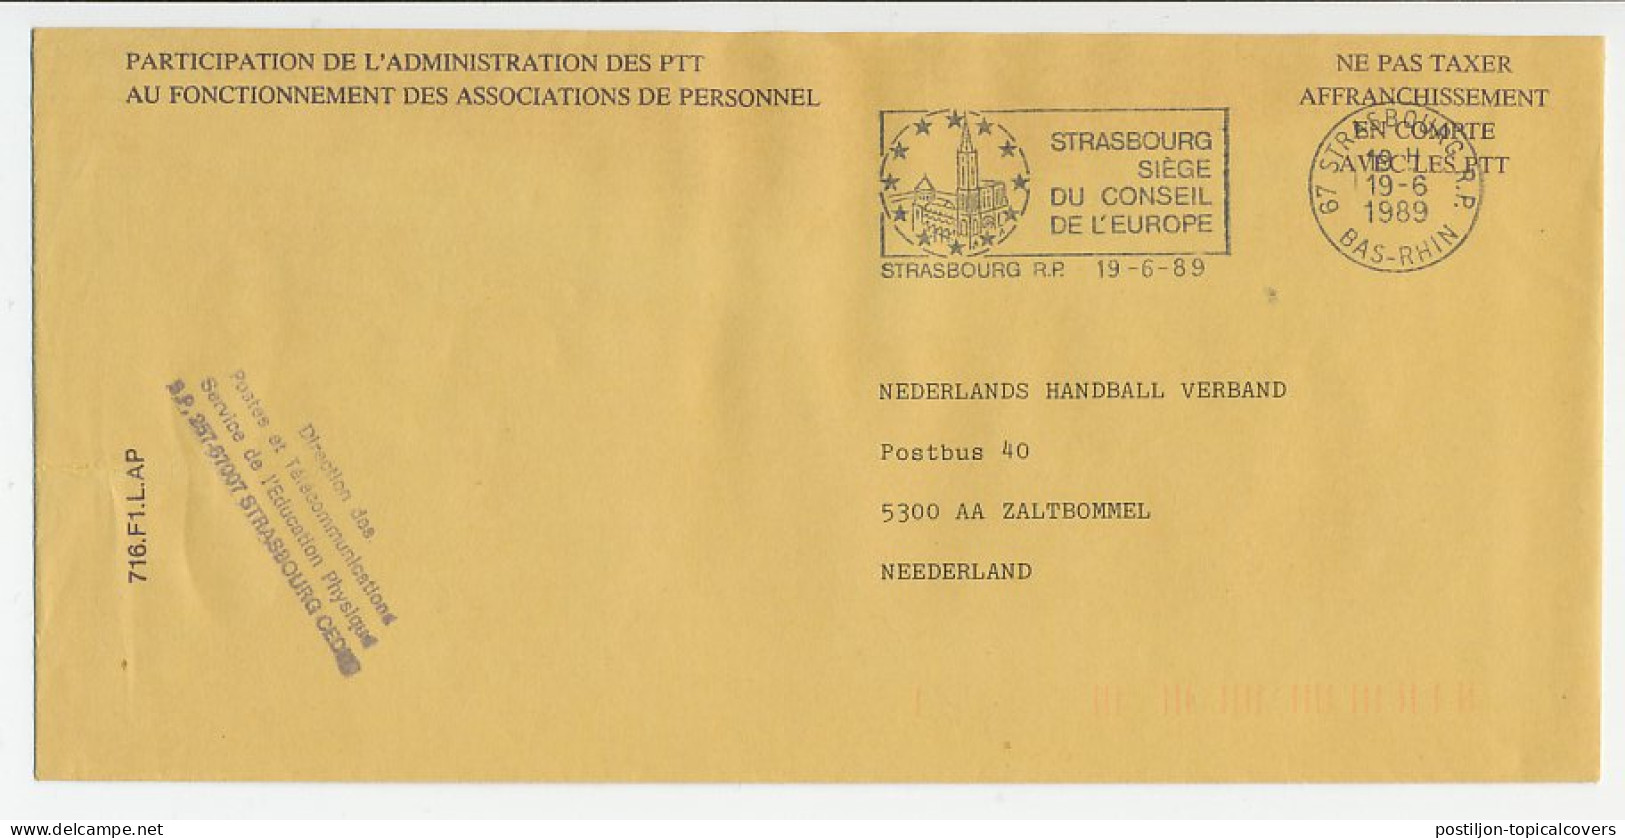 Service Cover / Postmark France 1989 Strasbourg Seat Of The Council Of Europe - European Community